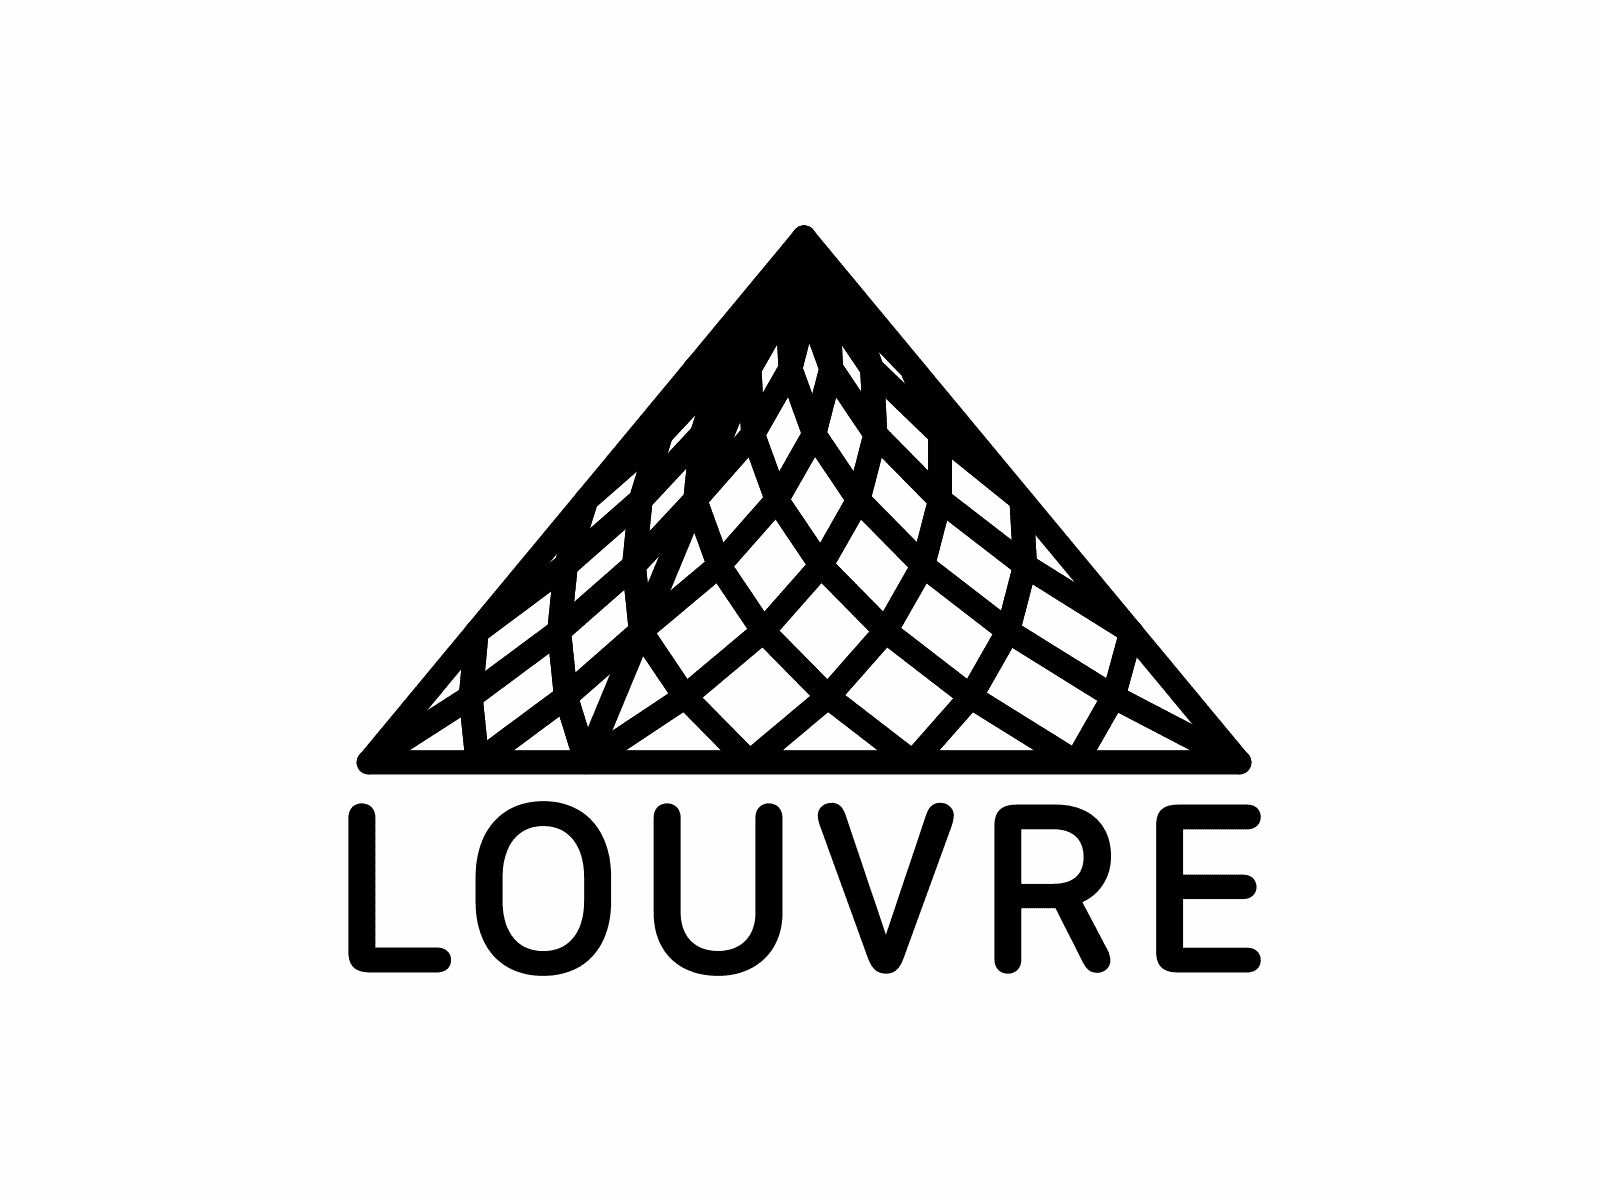 Animated logo for the Louvre